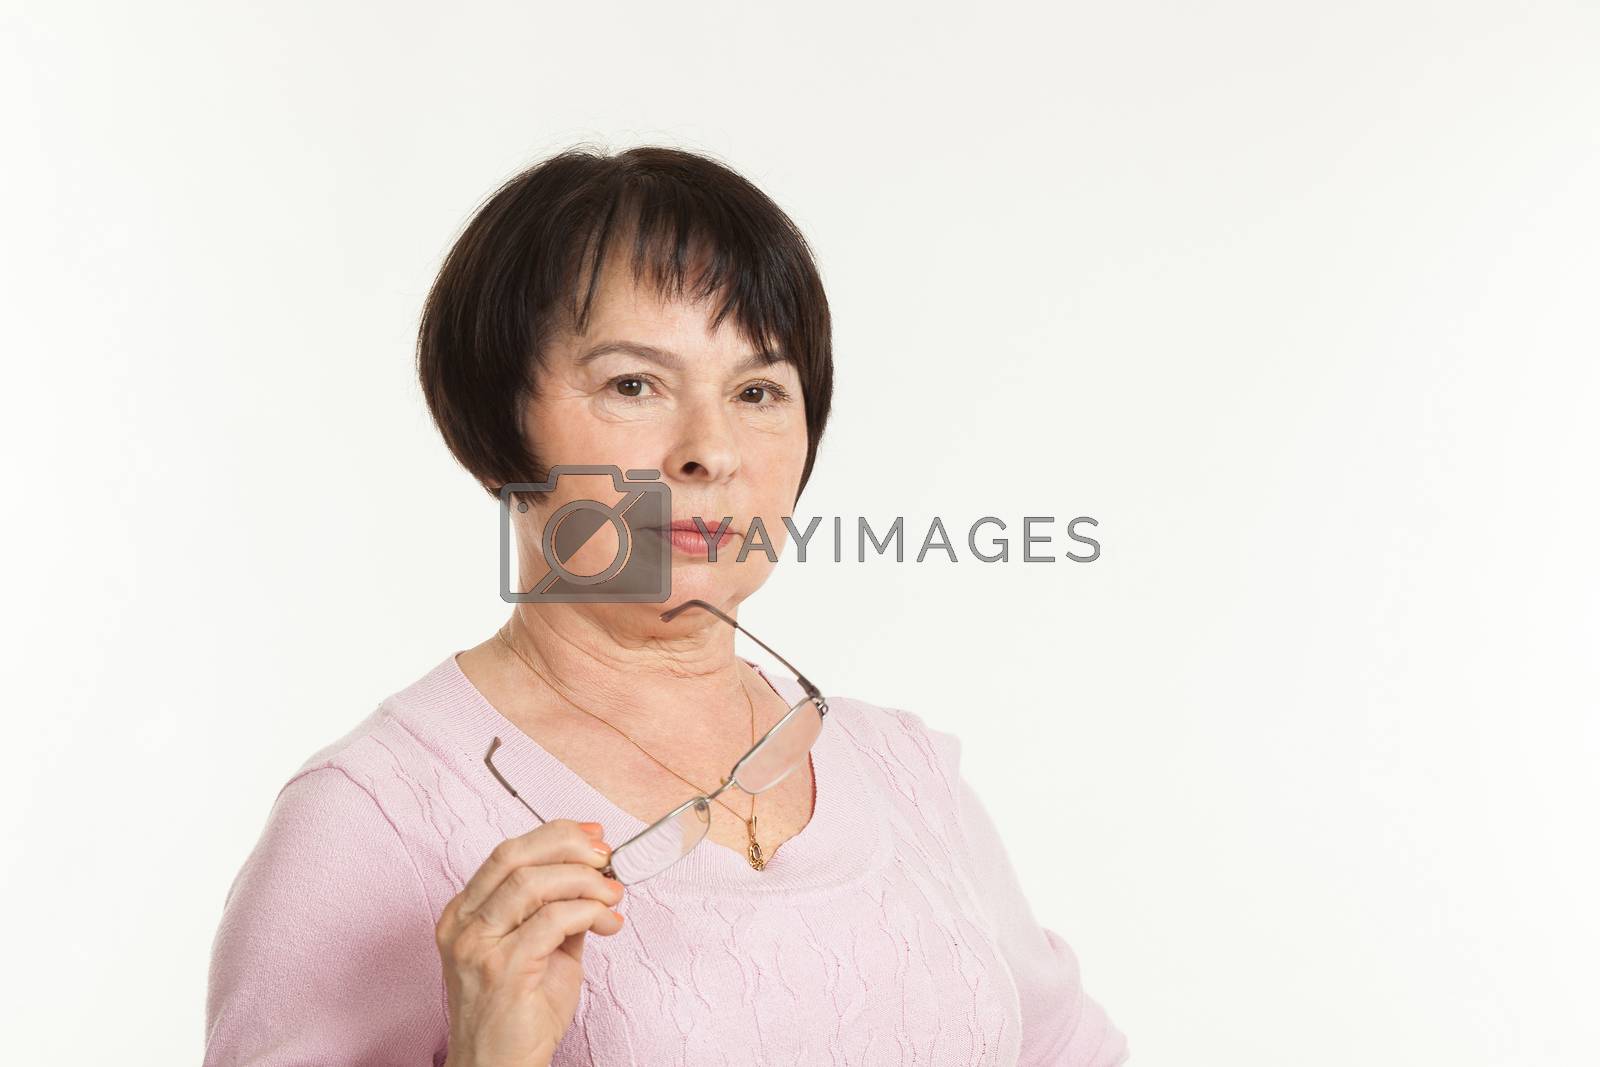 Royalty free image of the beautiful mature woman by sveter